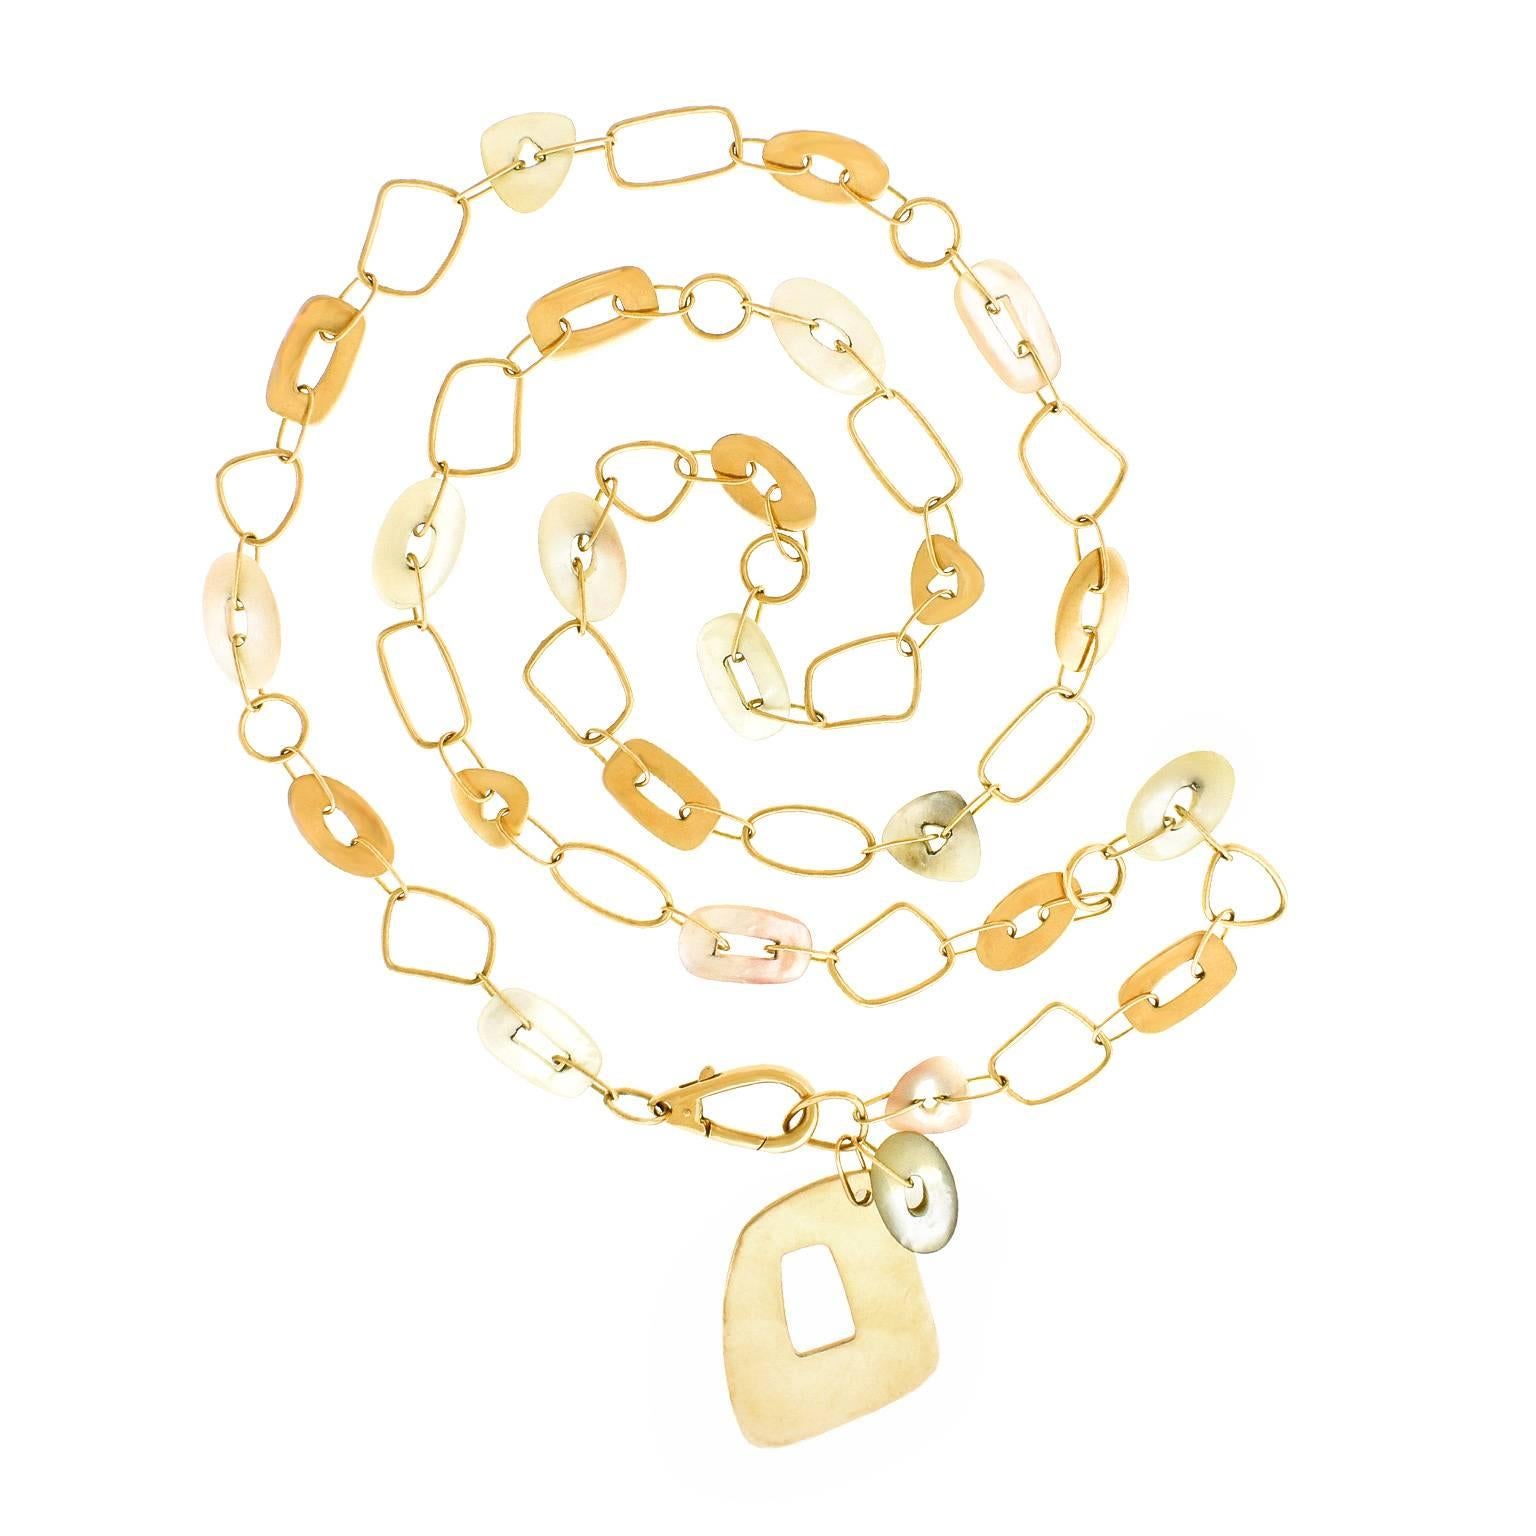 Contemporary, 18k, by Mattioli, Italy. This stylishly long necklace melds modern organo-chic with seventies groove. Easy breezy, it features amorphous rose gold links punctuated by mother of pearl elements. From Mattioli’s iconic “Puzzle” line, the